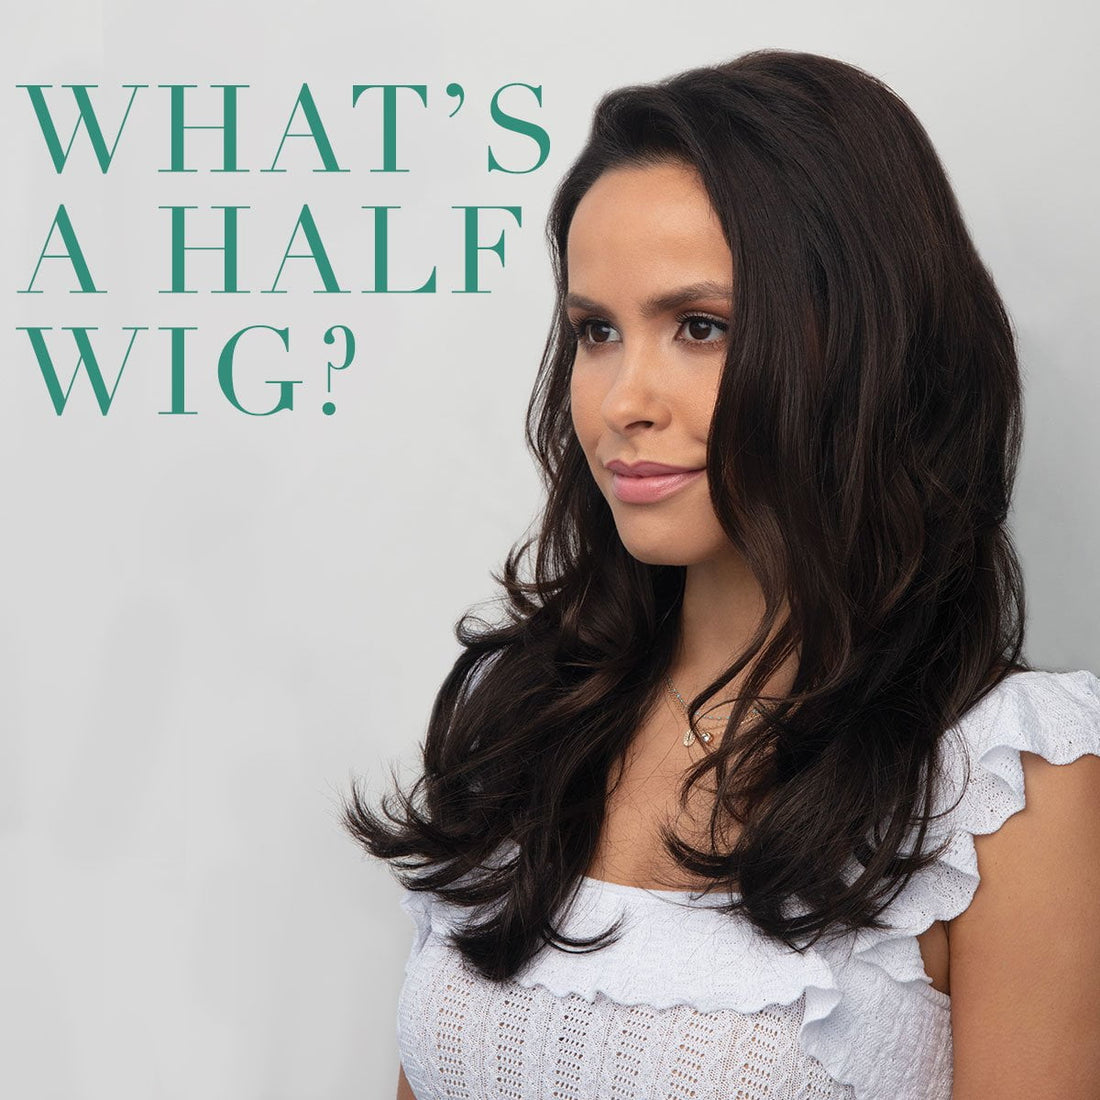 What is a Half Wig?